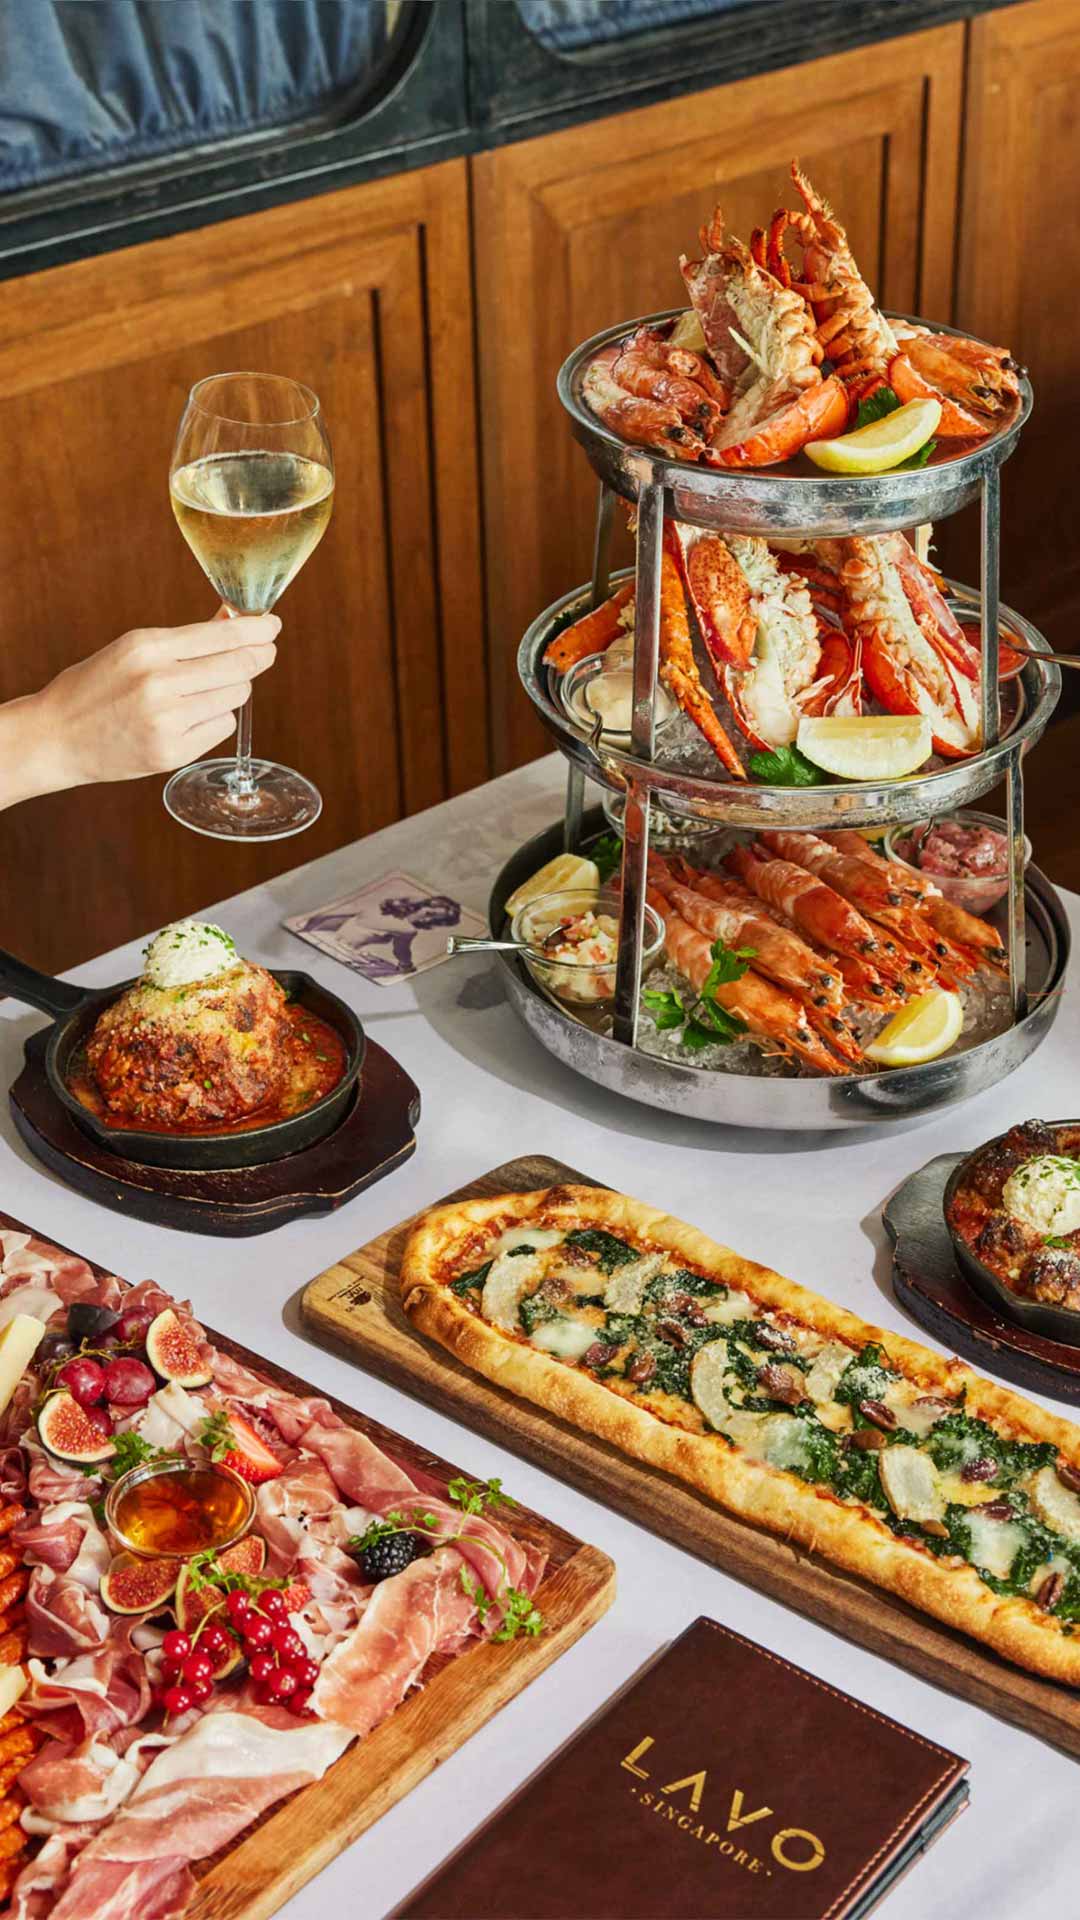 Champagne, pizza and a seafood platter at LAVO, the best dinner place in Singapore